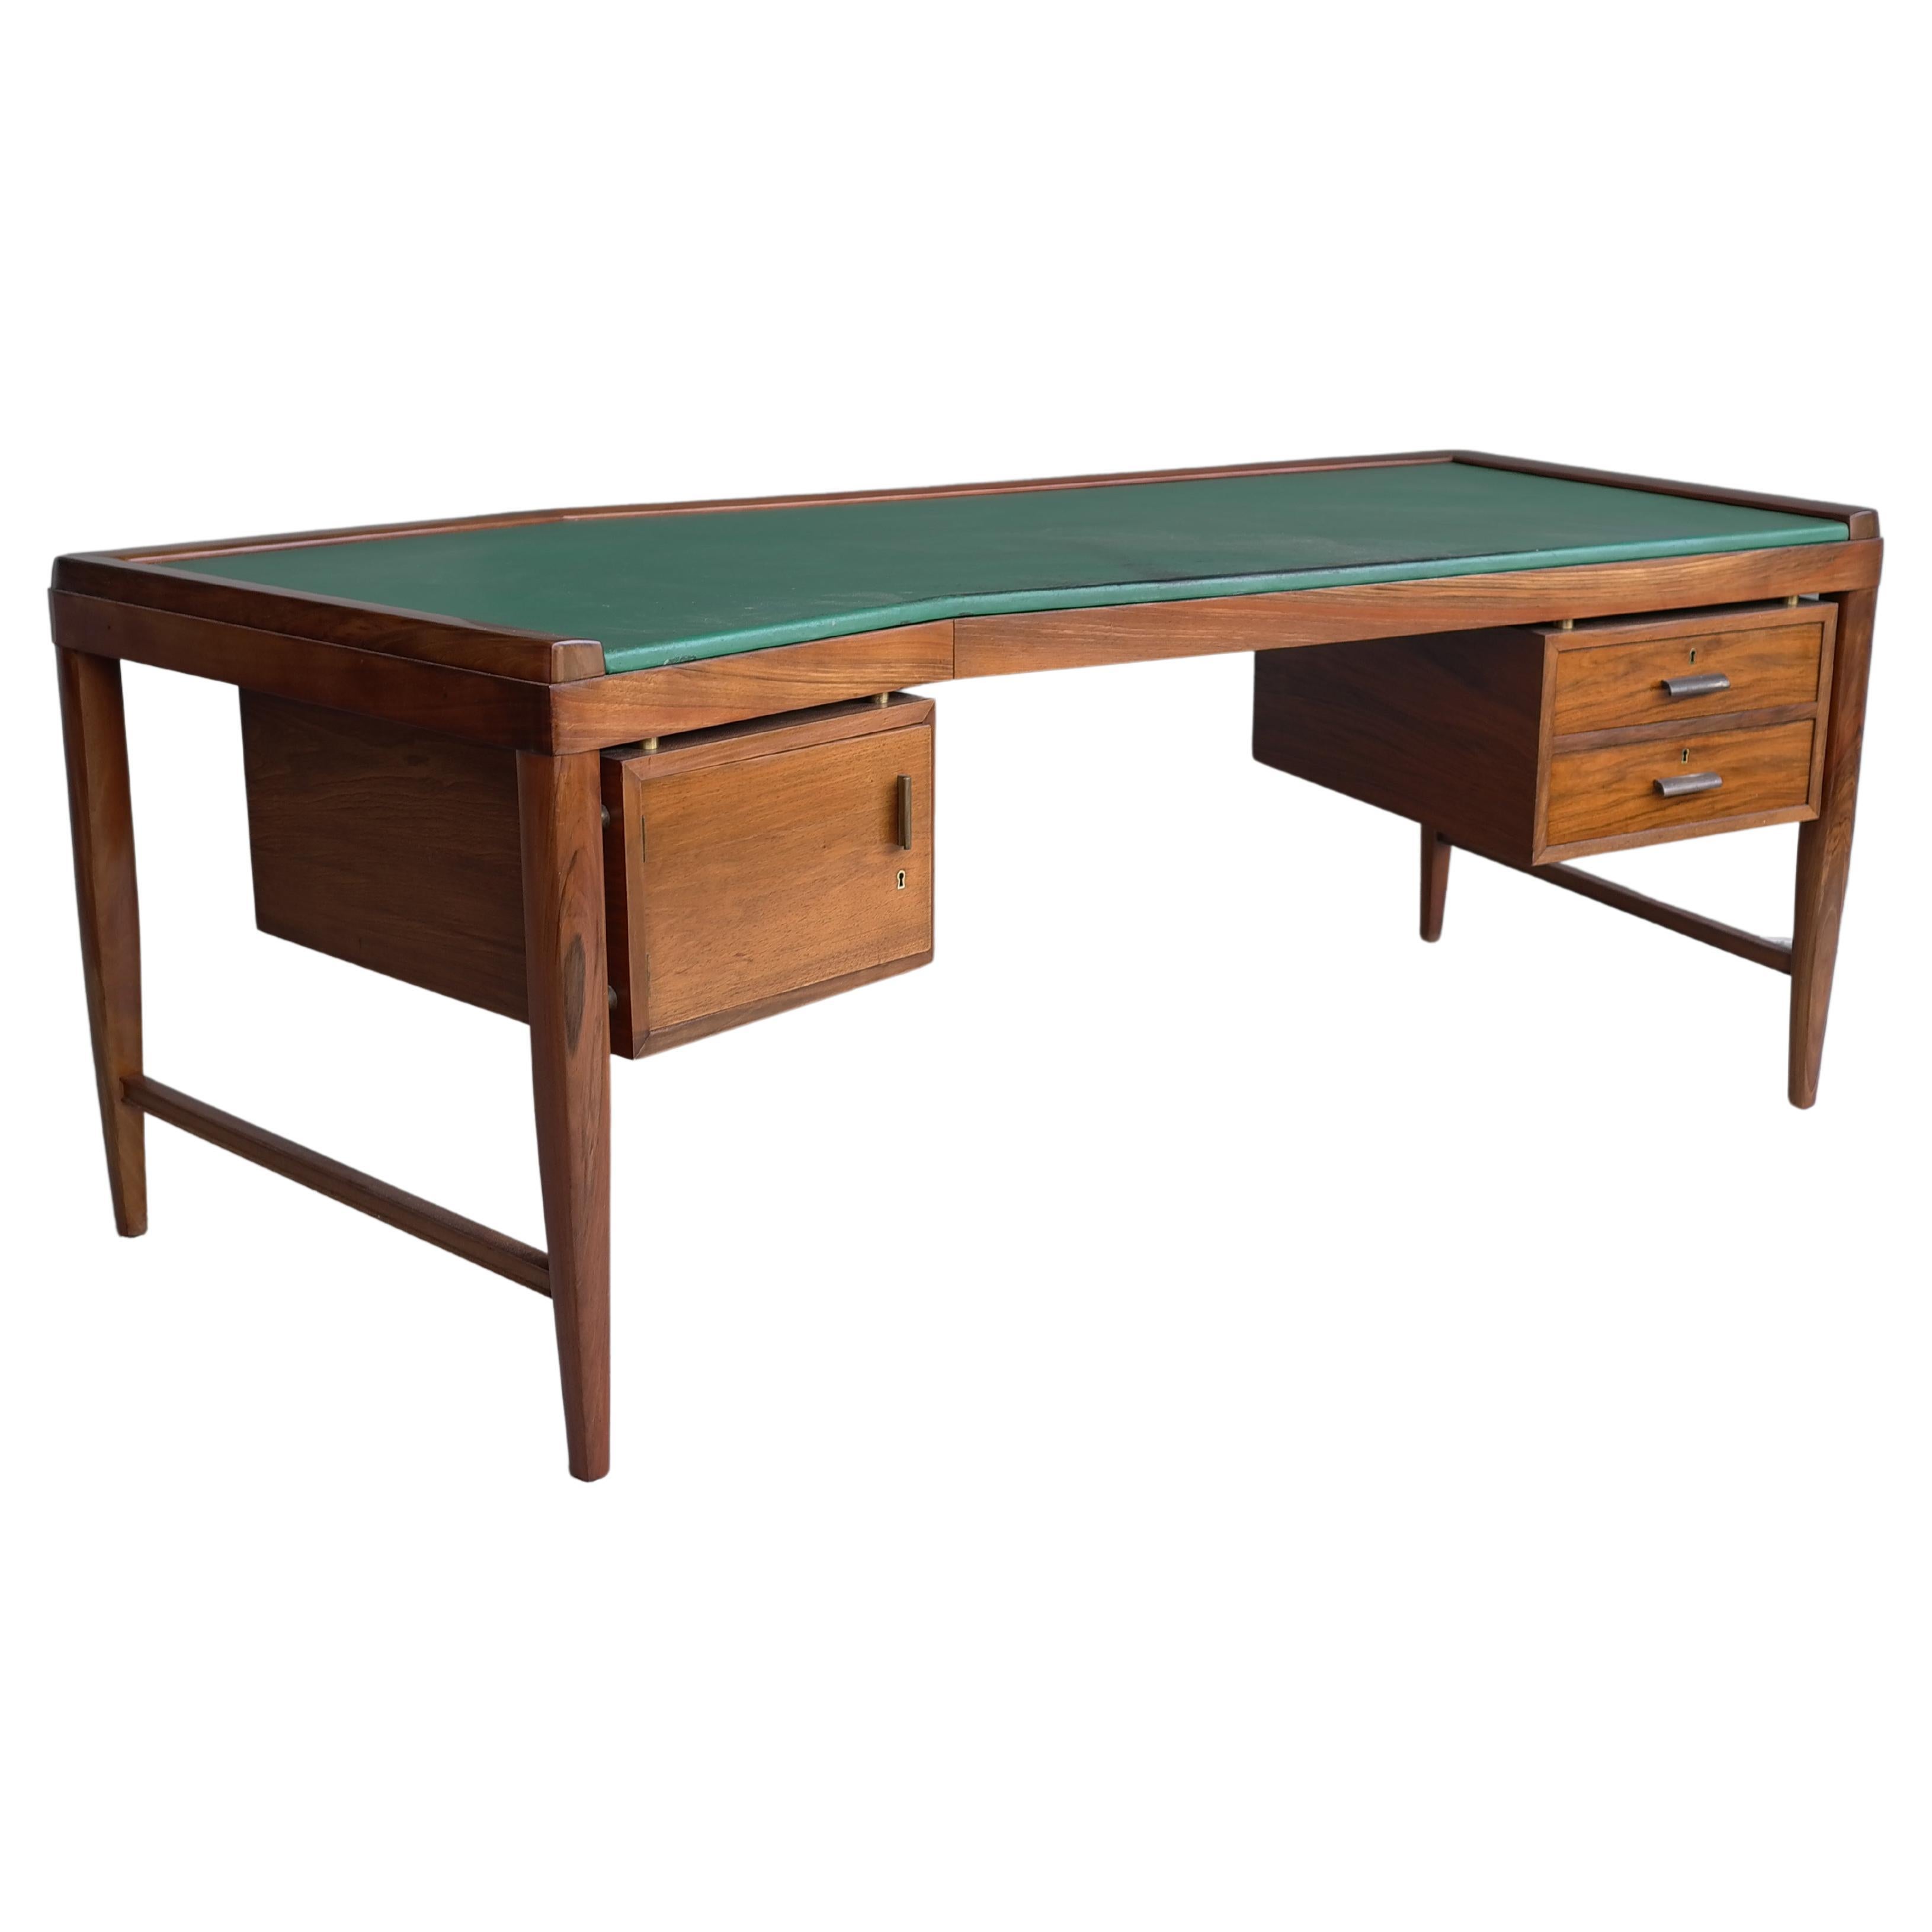 Large Boomerang shaped Walnut Desk with Green Leather patinated top Italy 1950’s For Sale 13